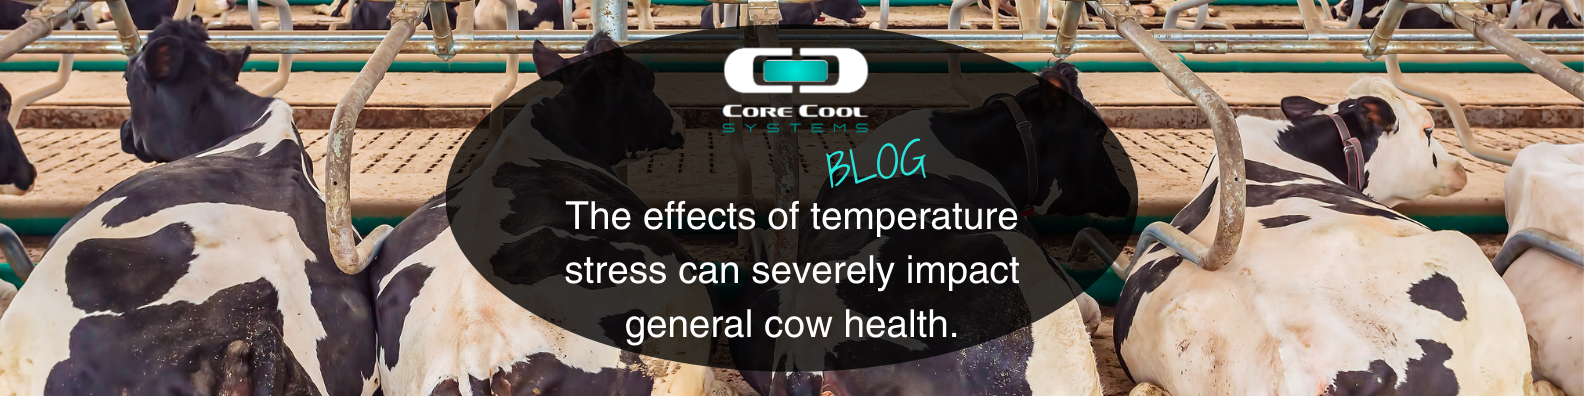 cow health.png